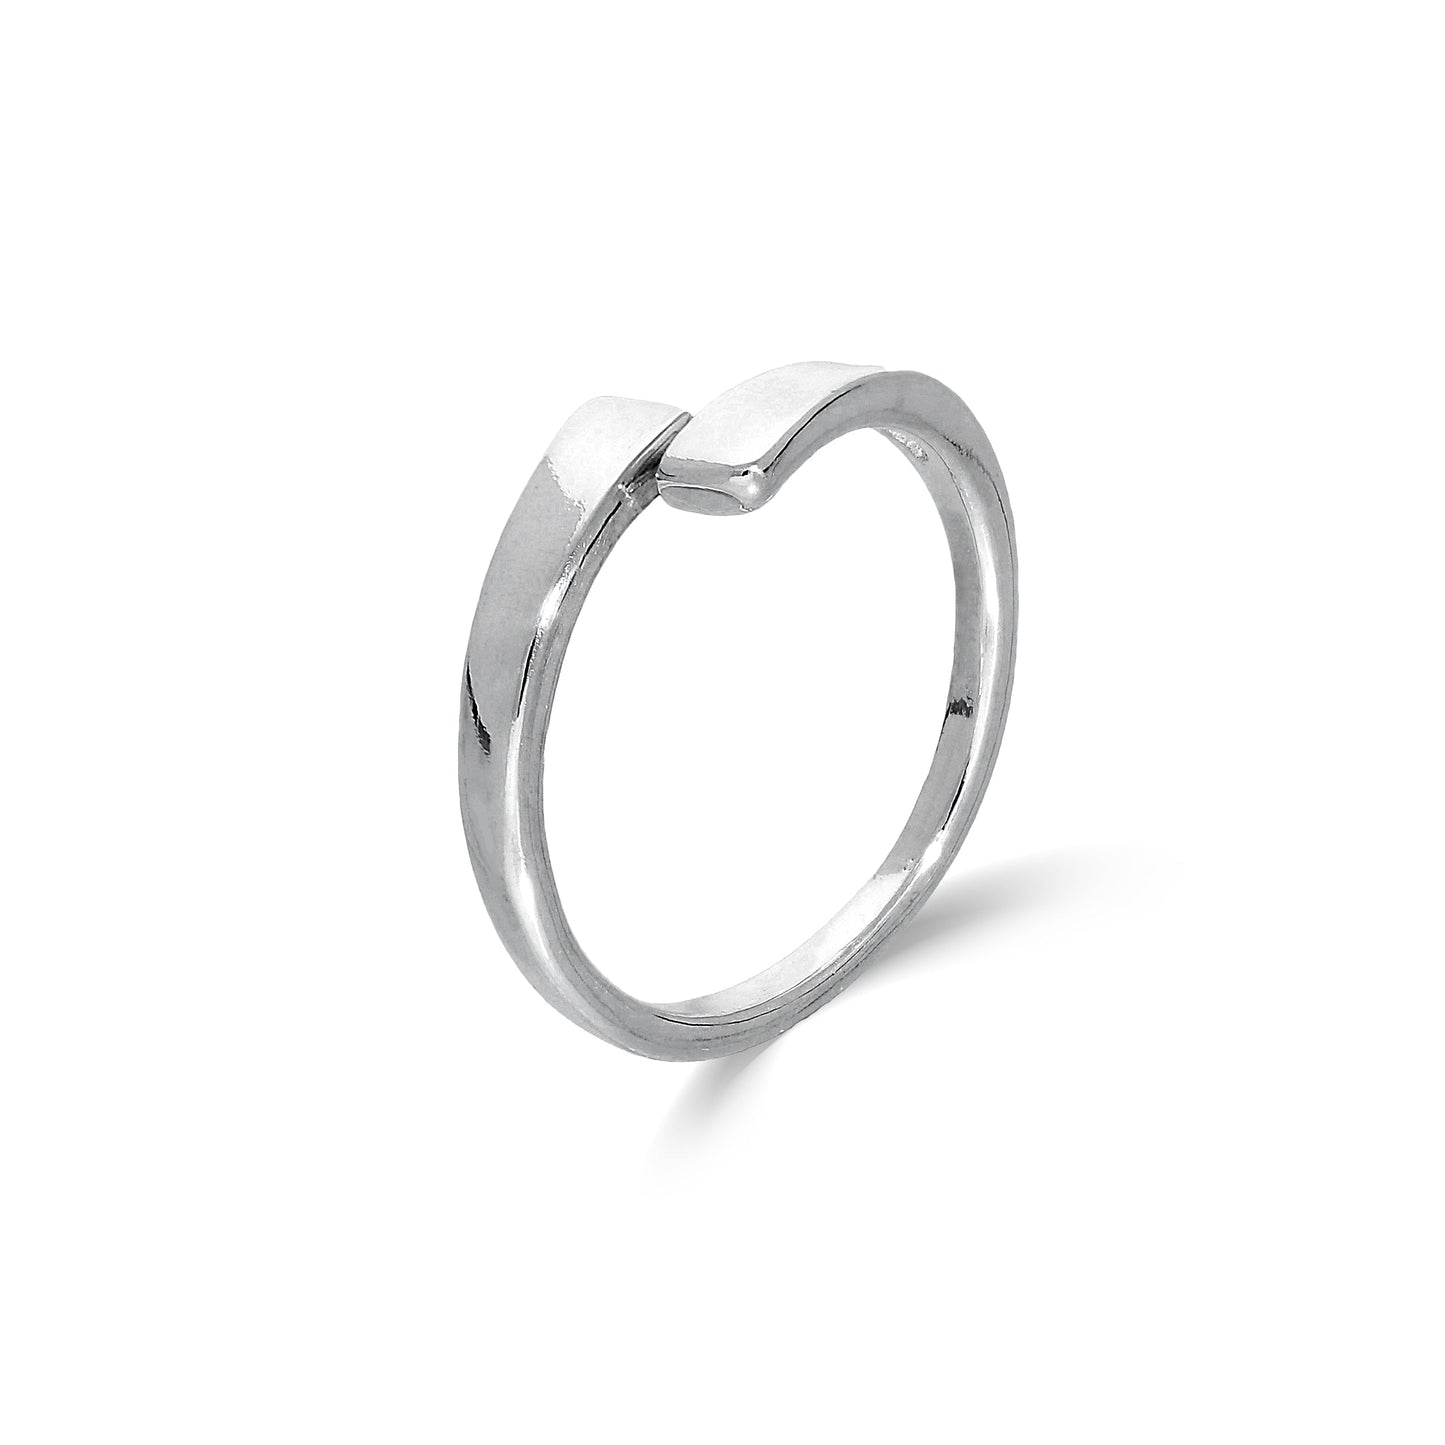 Sterling Silver Adjustable Wrap Around Midi Toe Ring